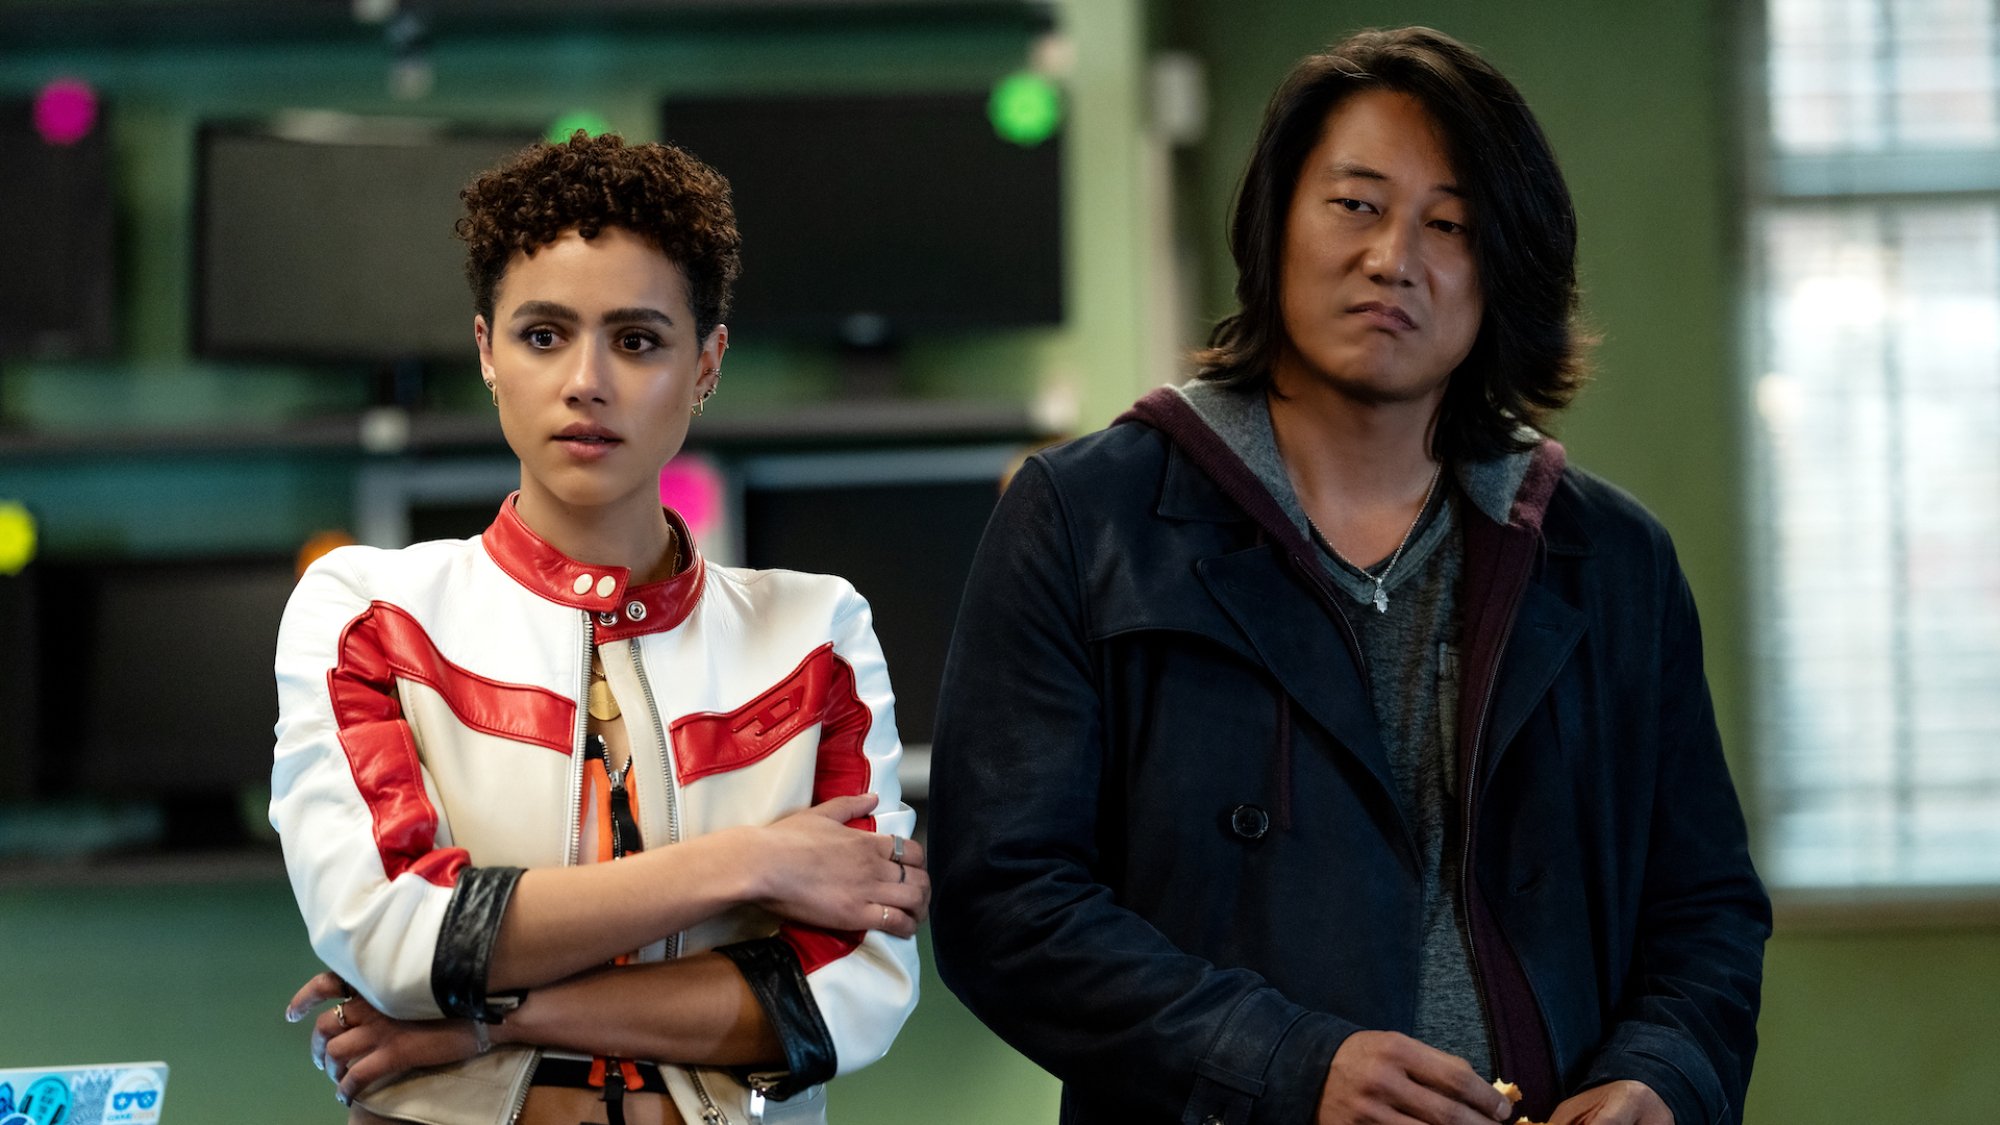 Nathalie Emmanuel and Sung Kang stand beside each other in a high-tech room in the film "Fast X."